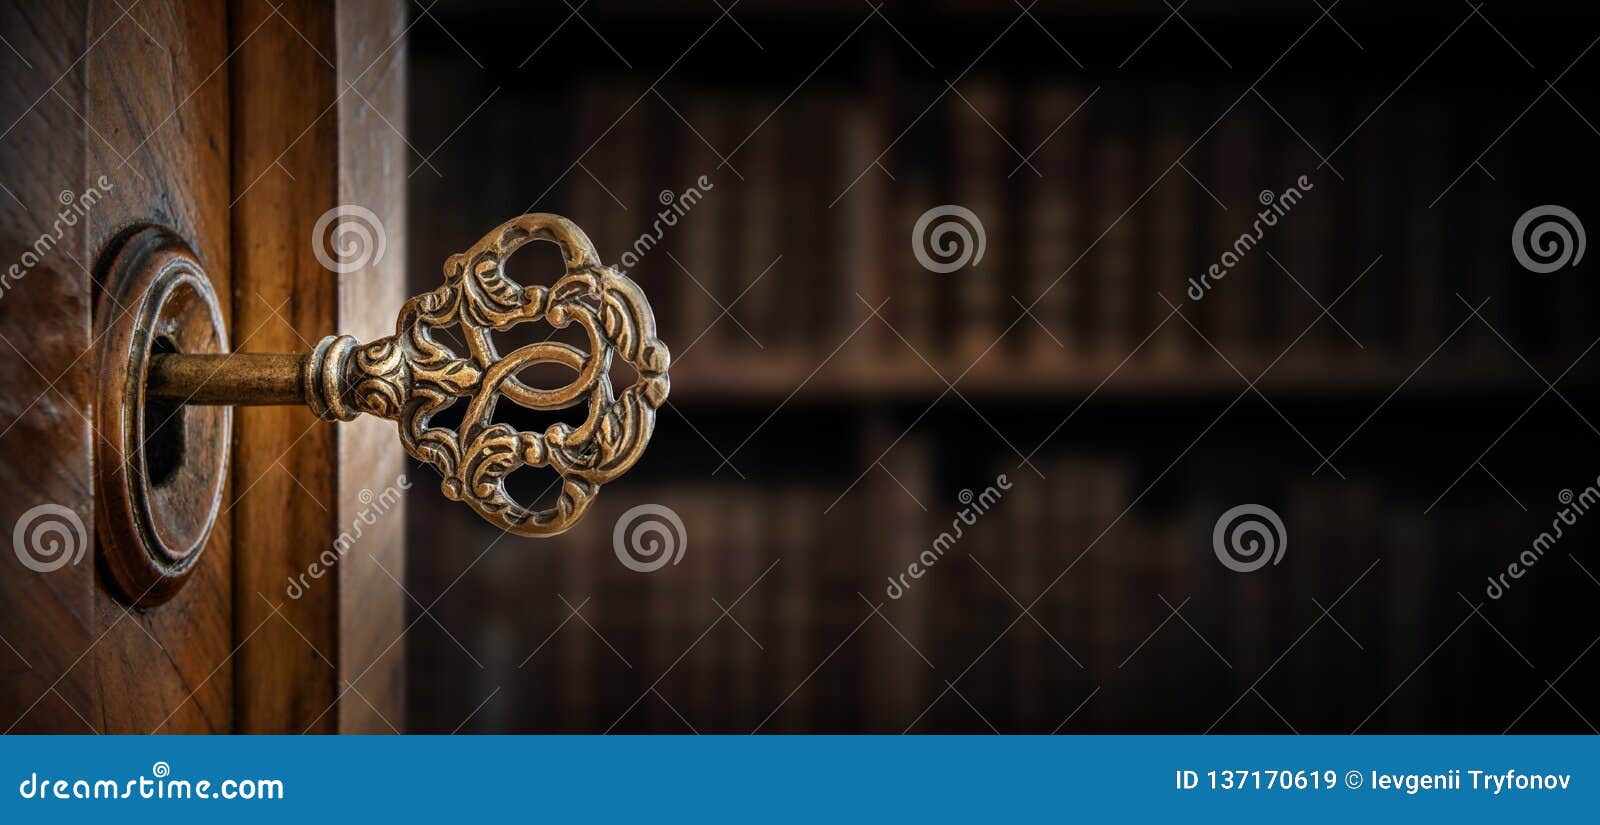 old key in keyhole. retro style. concept and idea for history, business, security background. write your text here